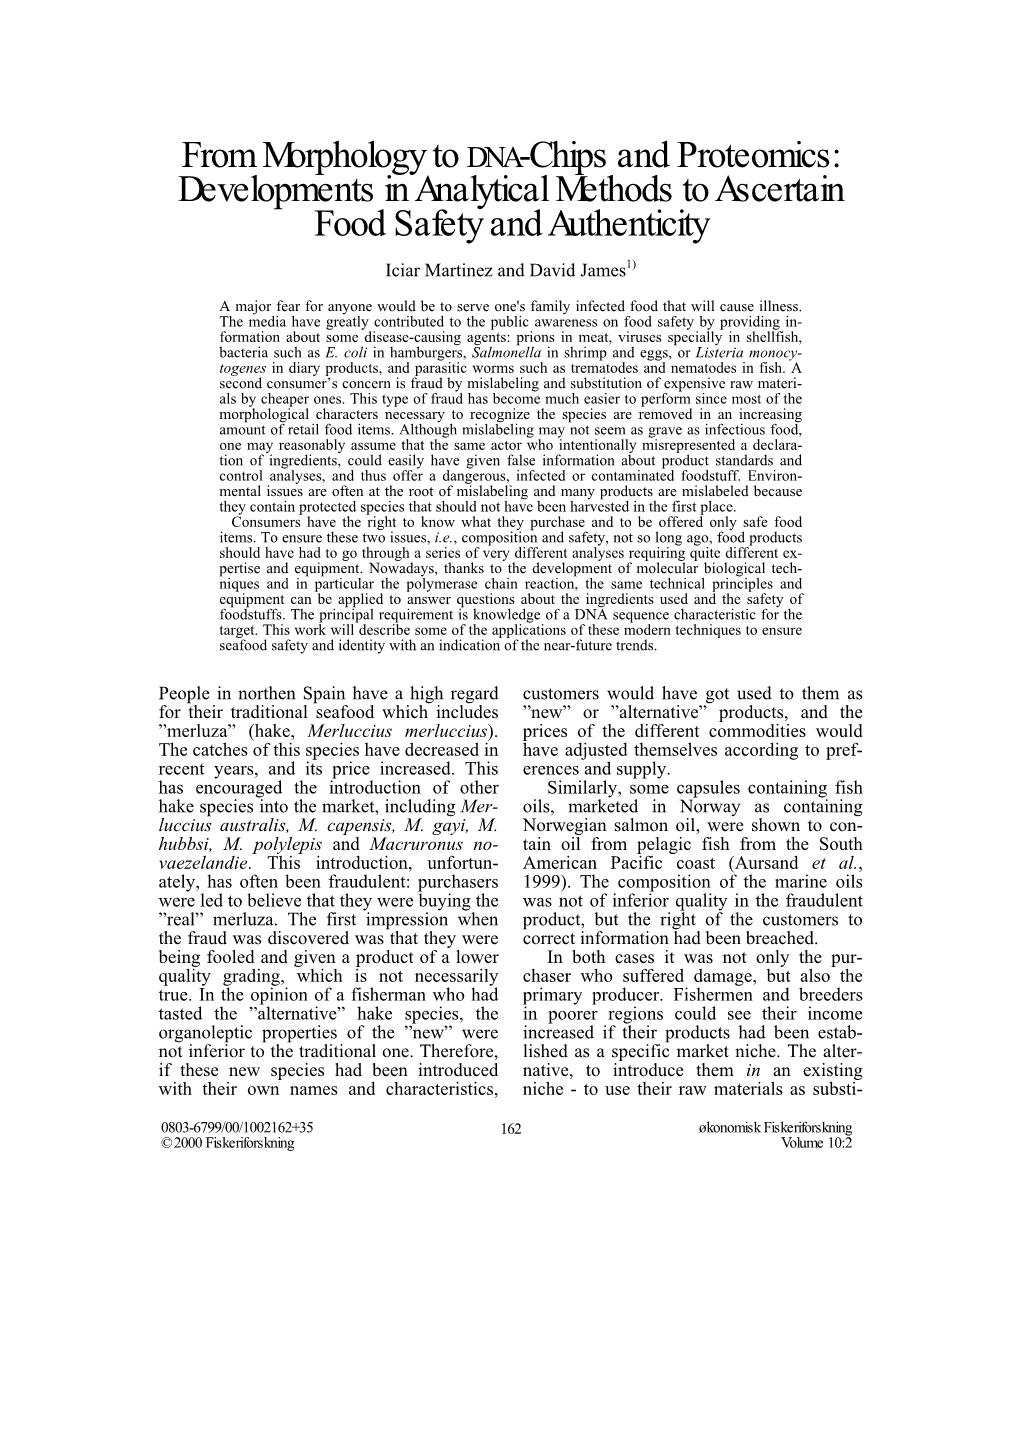 From Morphology to DNA-Chips and Proteomics: Developments in Analytical Methods to Ascertain Food Safety and Authenticity Iciar Martinez and David James1)